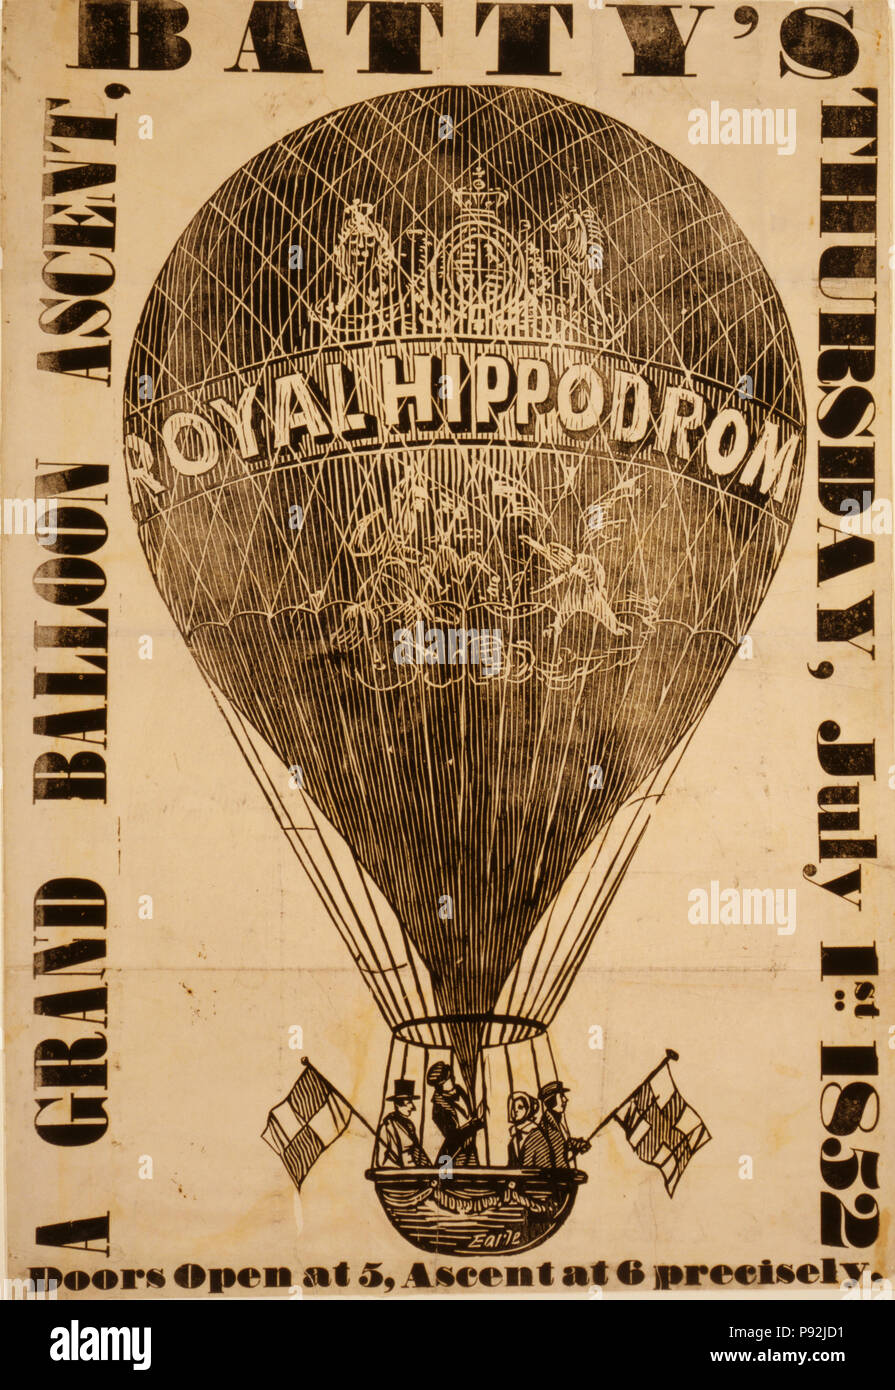 oster shows three men and a woman holding flags while sitting in the basket of an ascending balloon labeled 'Royal Hippodrom[e]' to advertise a public ascent at Batty's Grand National Hippodrome in London, England. 1850s Stock Photo